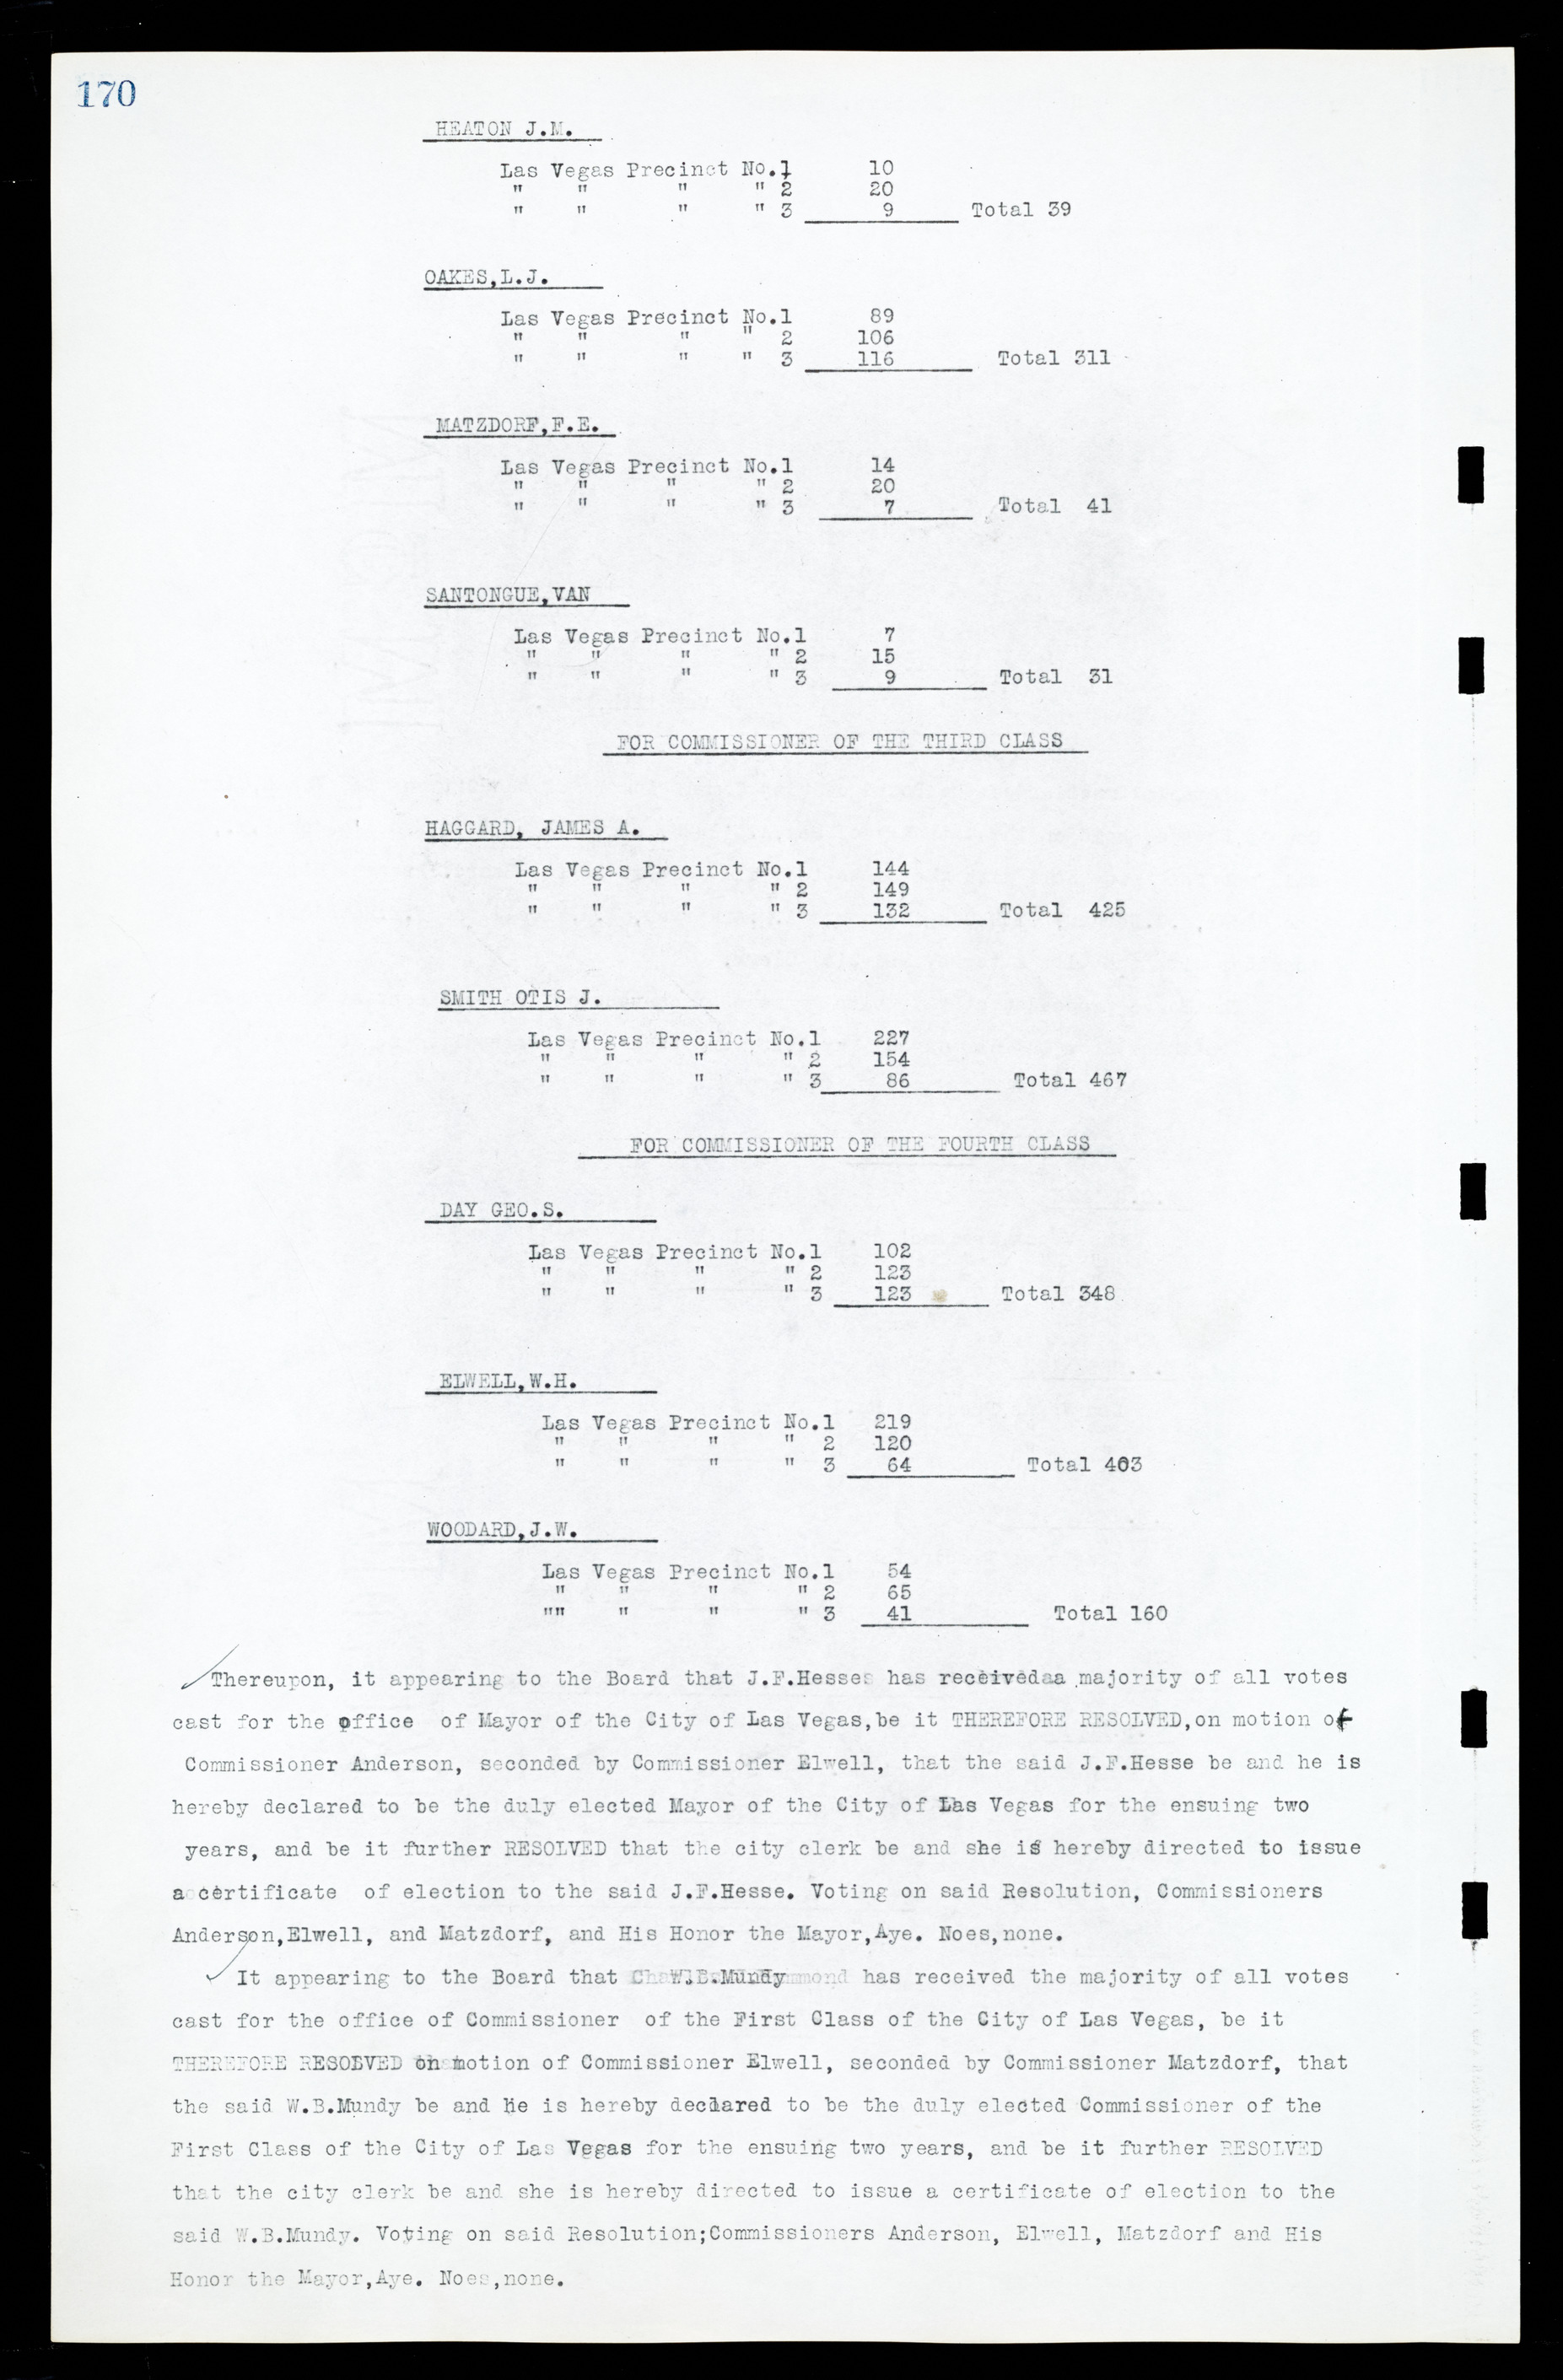 Las Vegas City Commission Minutes, March 1, 1922 to May 10, 1929, lvc000002-177